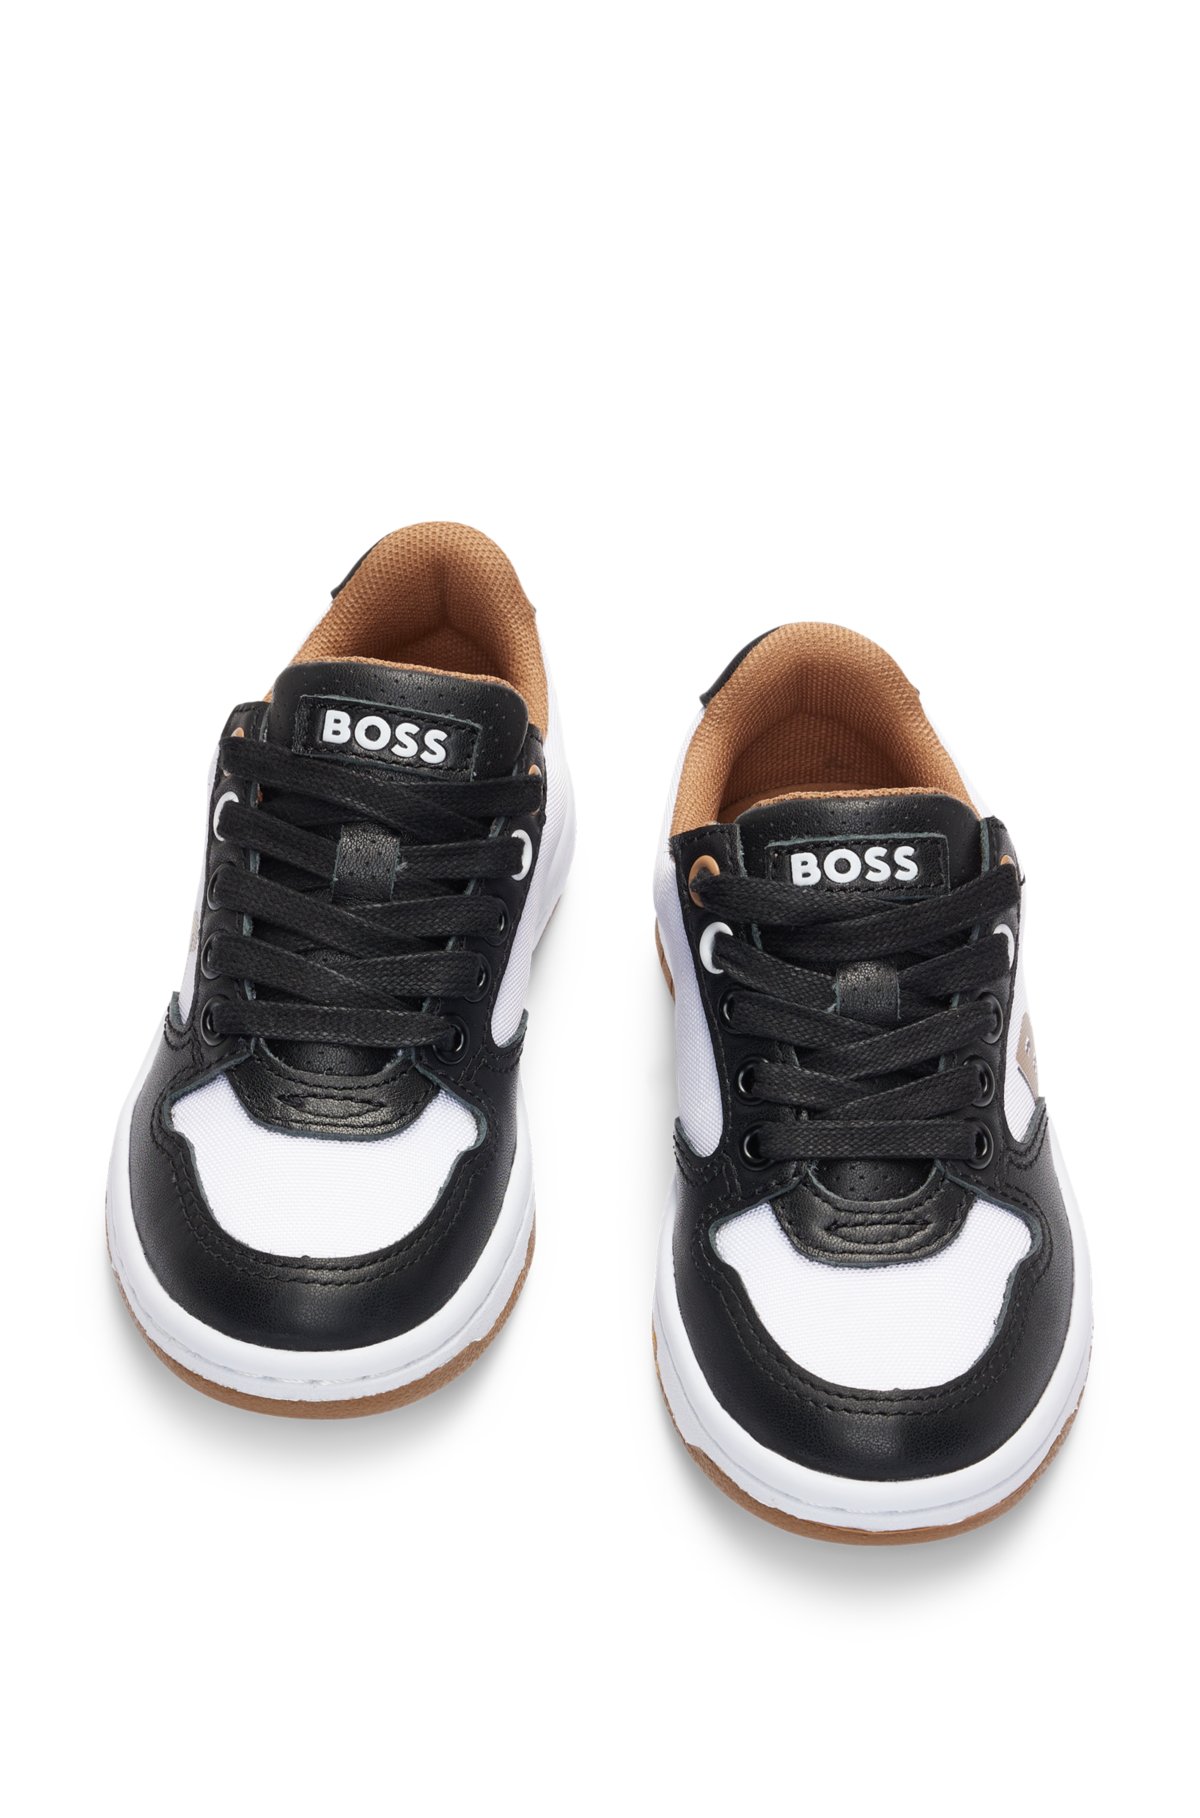 Kids' trainers in canvas and leather with embossed branding, Black